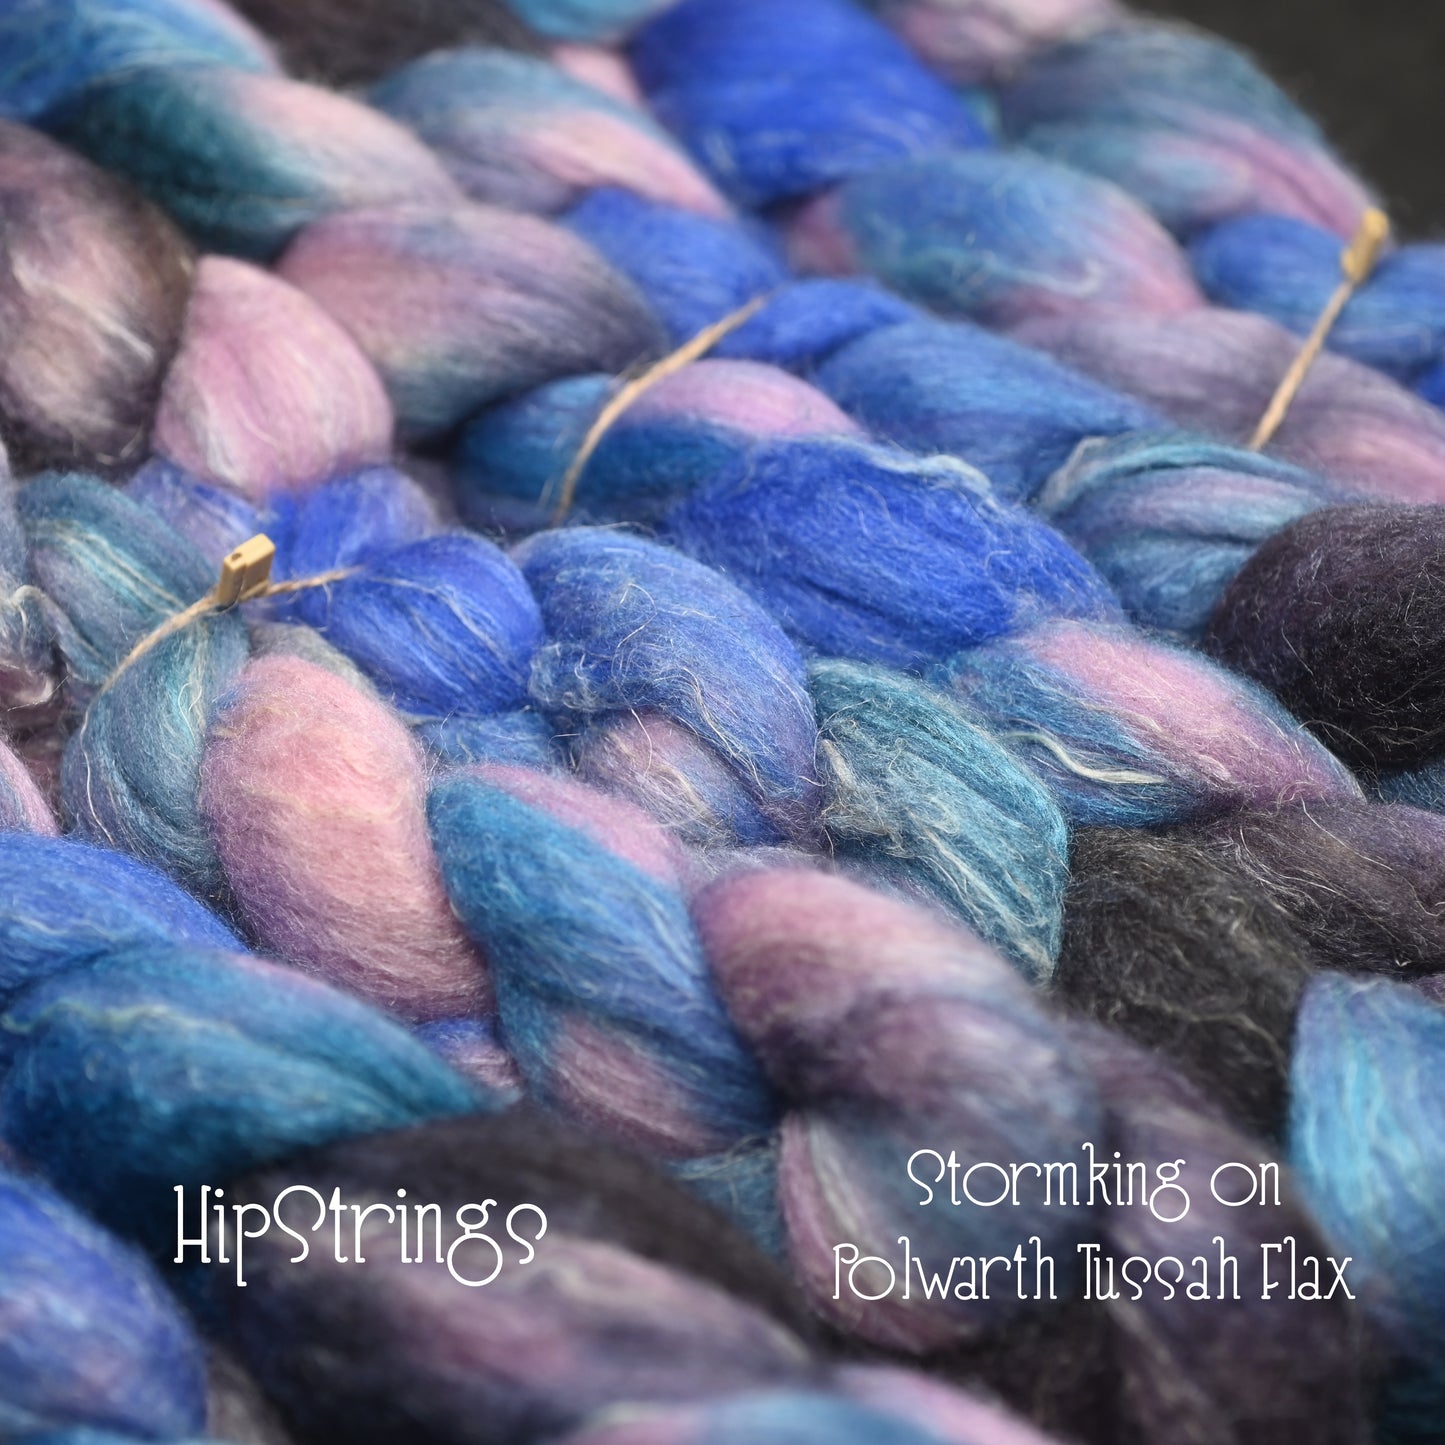 Stormking on Hand Dyed Polwarth/Silk/Flax Combed Top - 4 oz